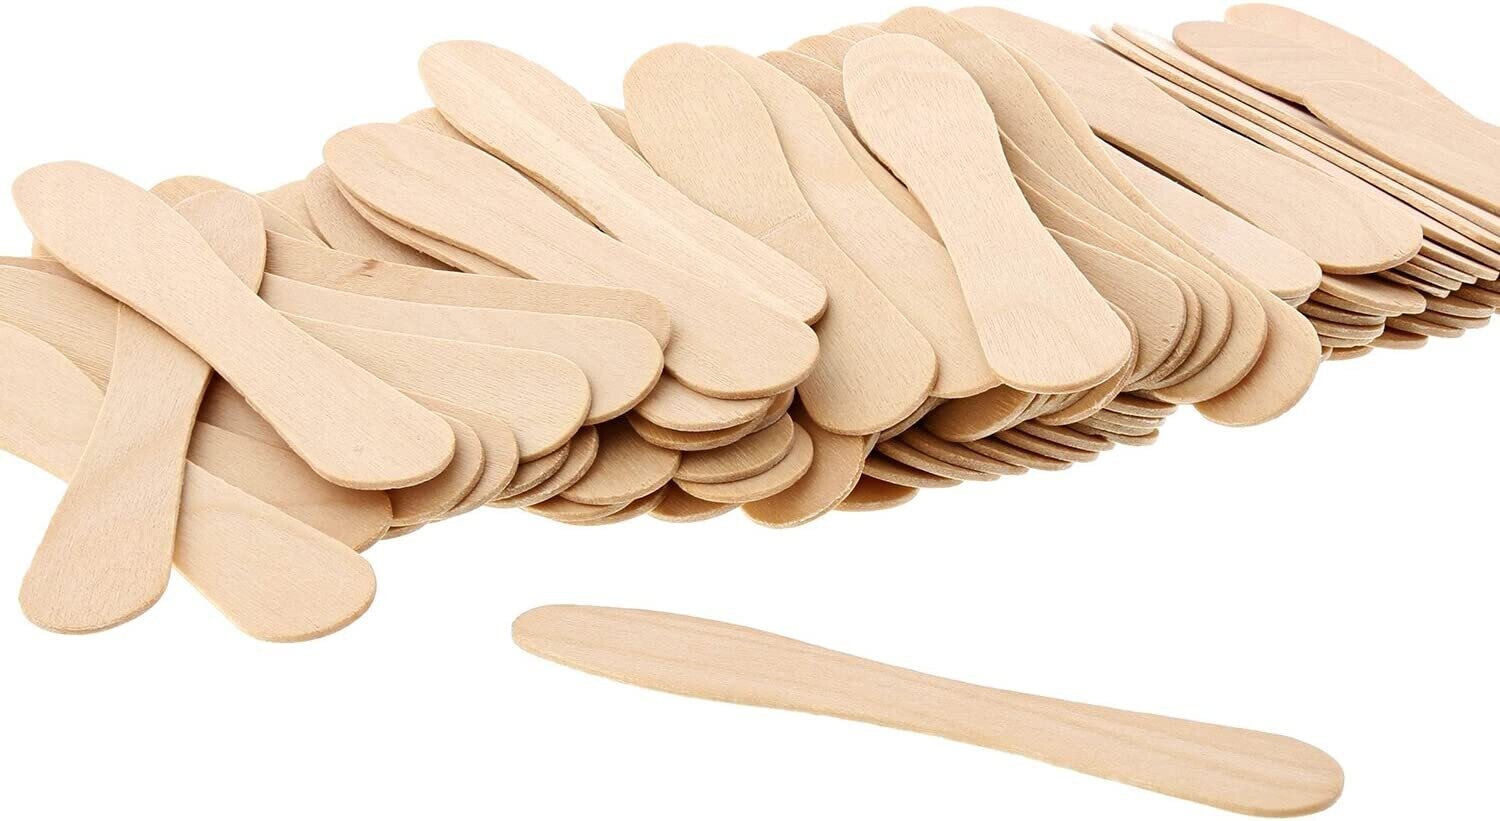 Wooden Disposable ice cream Spoons10pcss Dessert Spoons Tasting Spoons